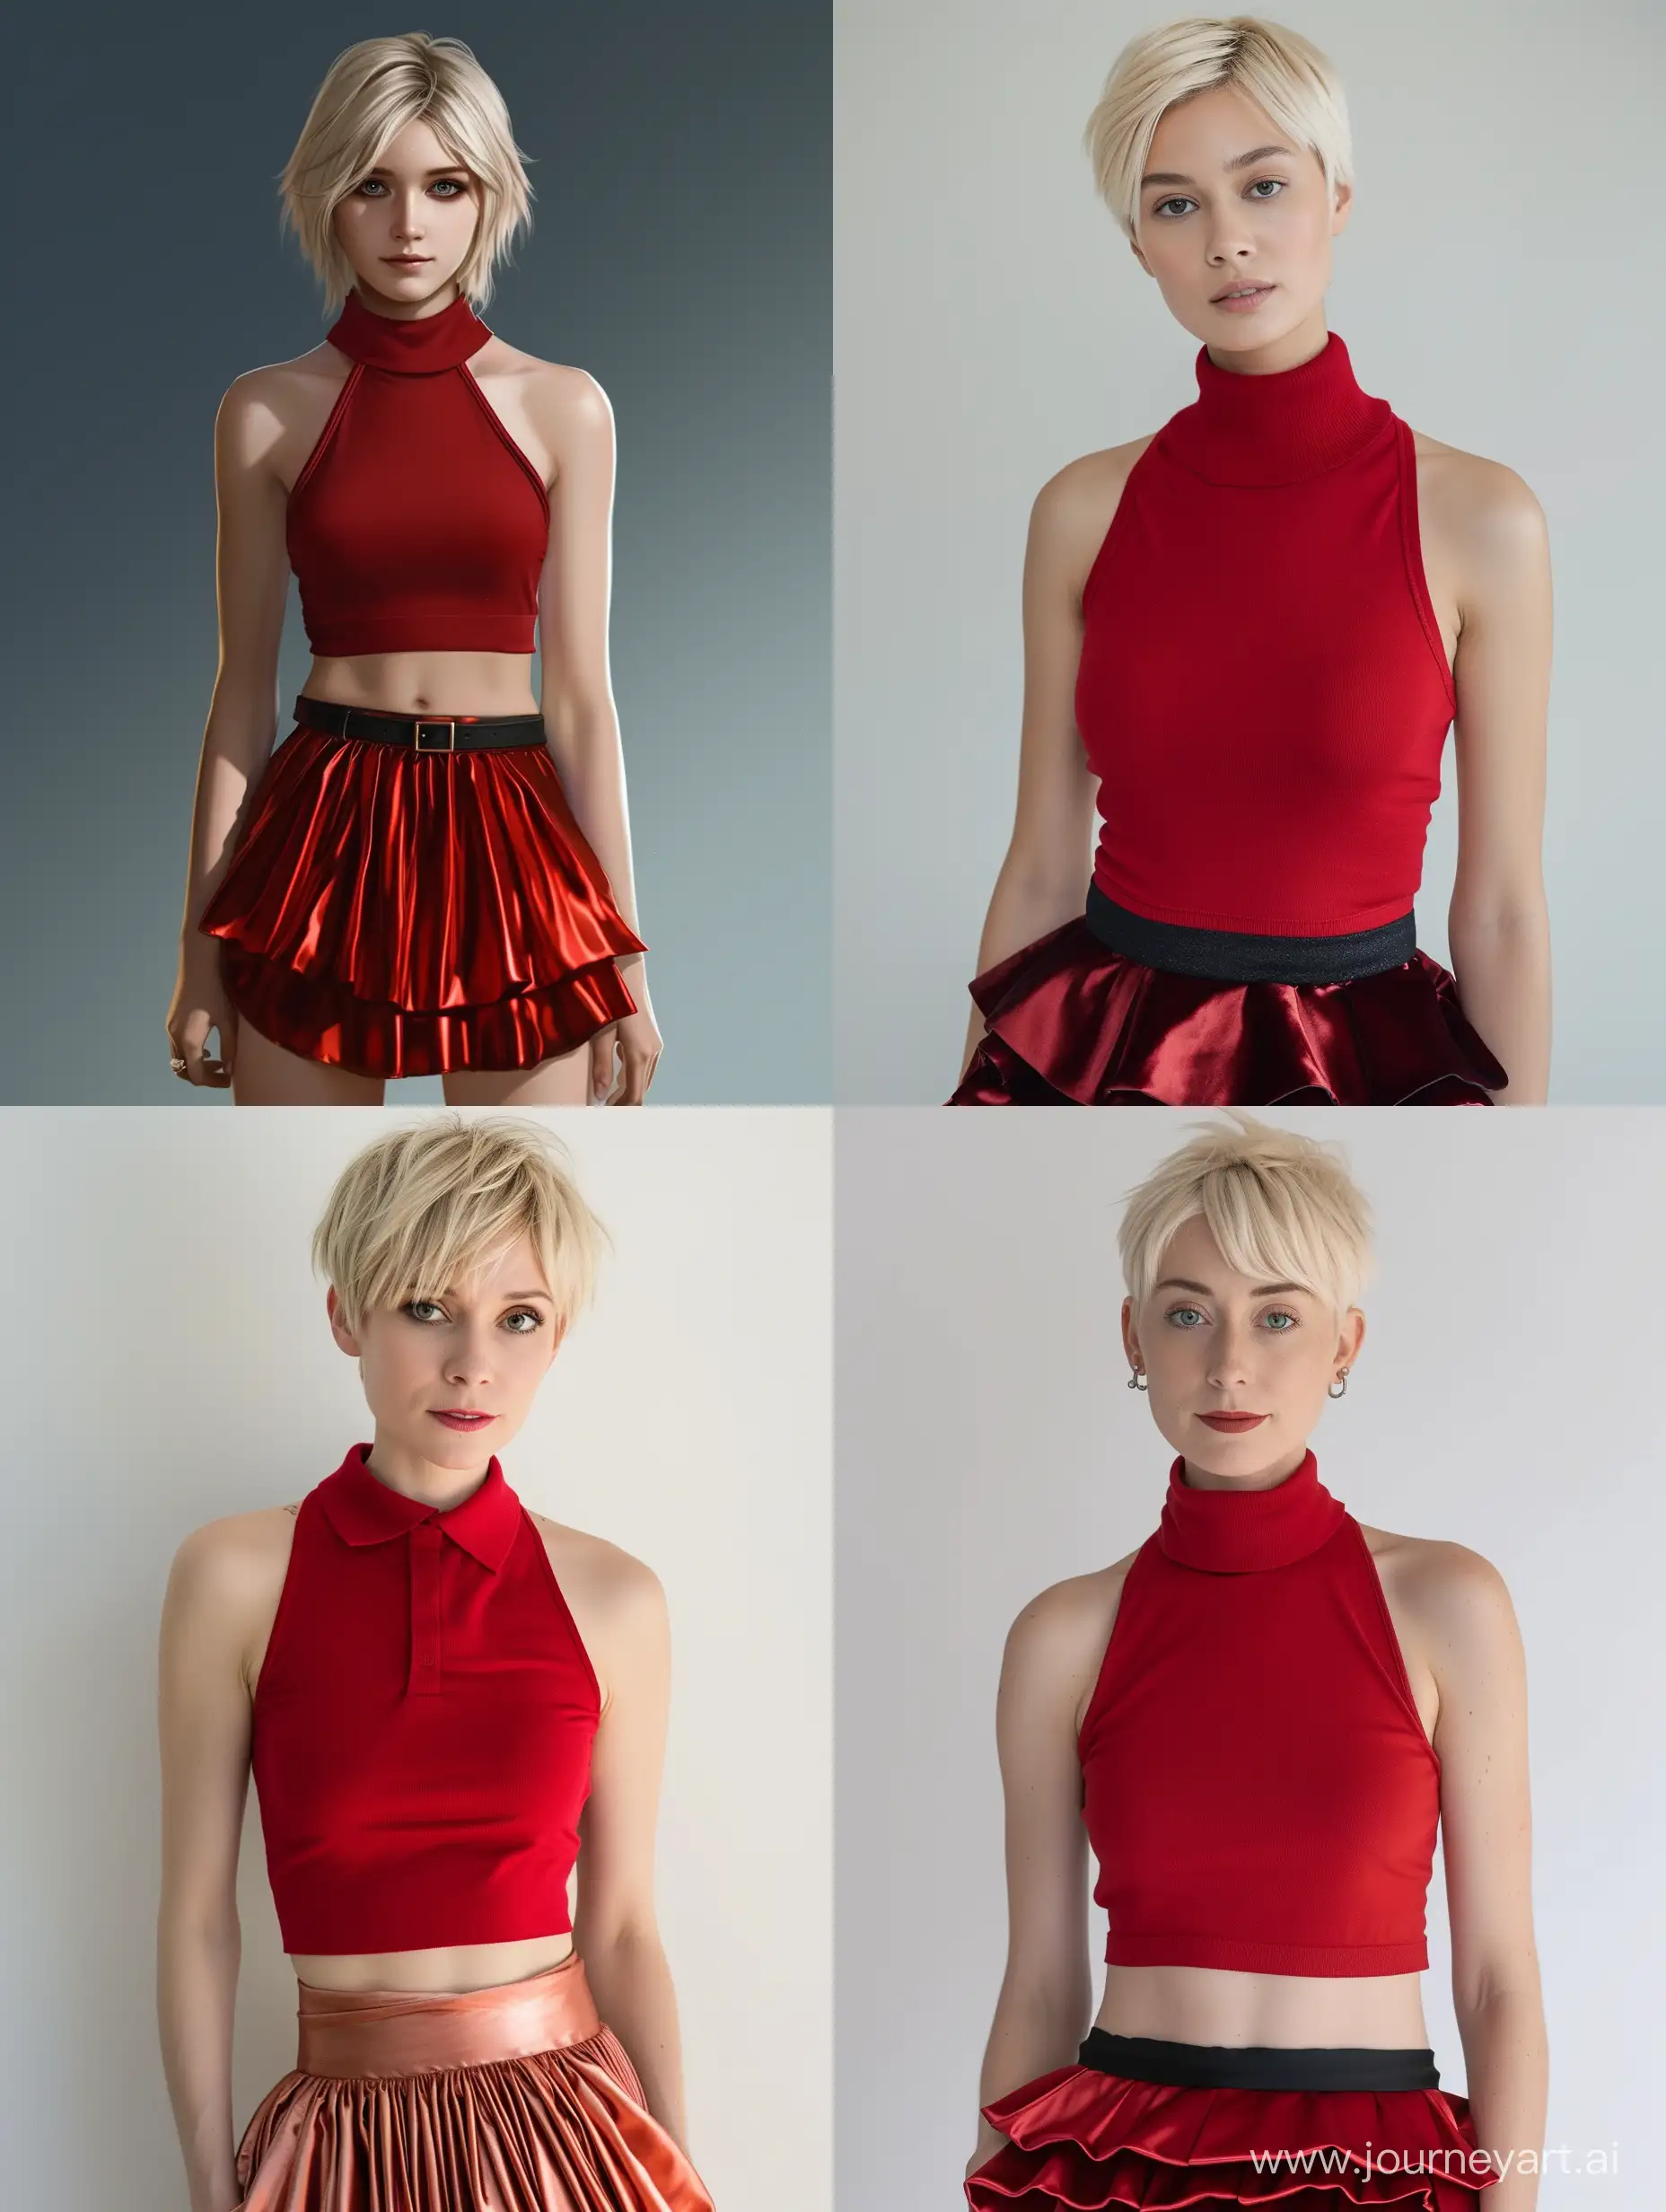 Elegant-ShortHaired-Woman-in-Red-Halter-Polo-Neck-and-Satin-Layered-Mini-Skirt